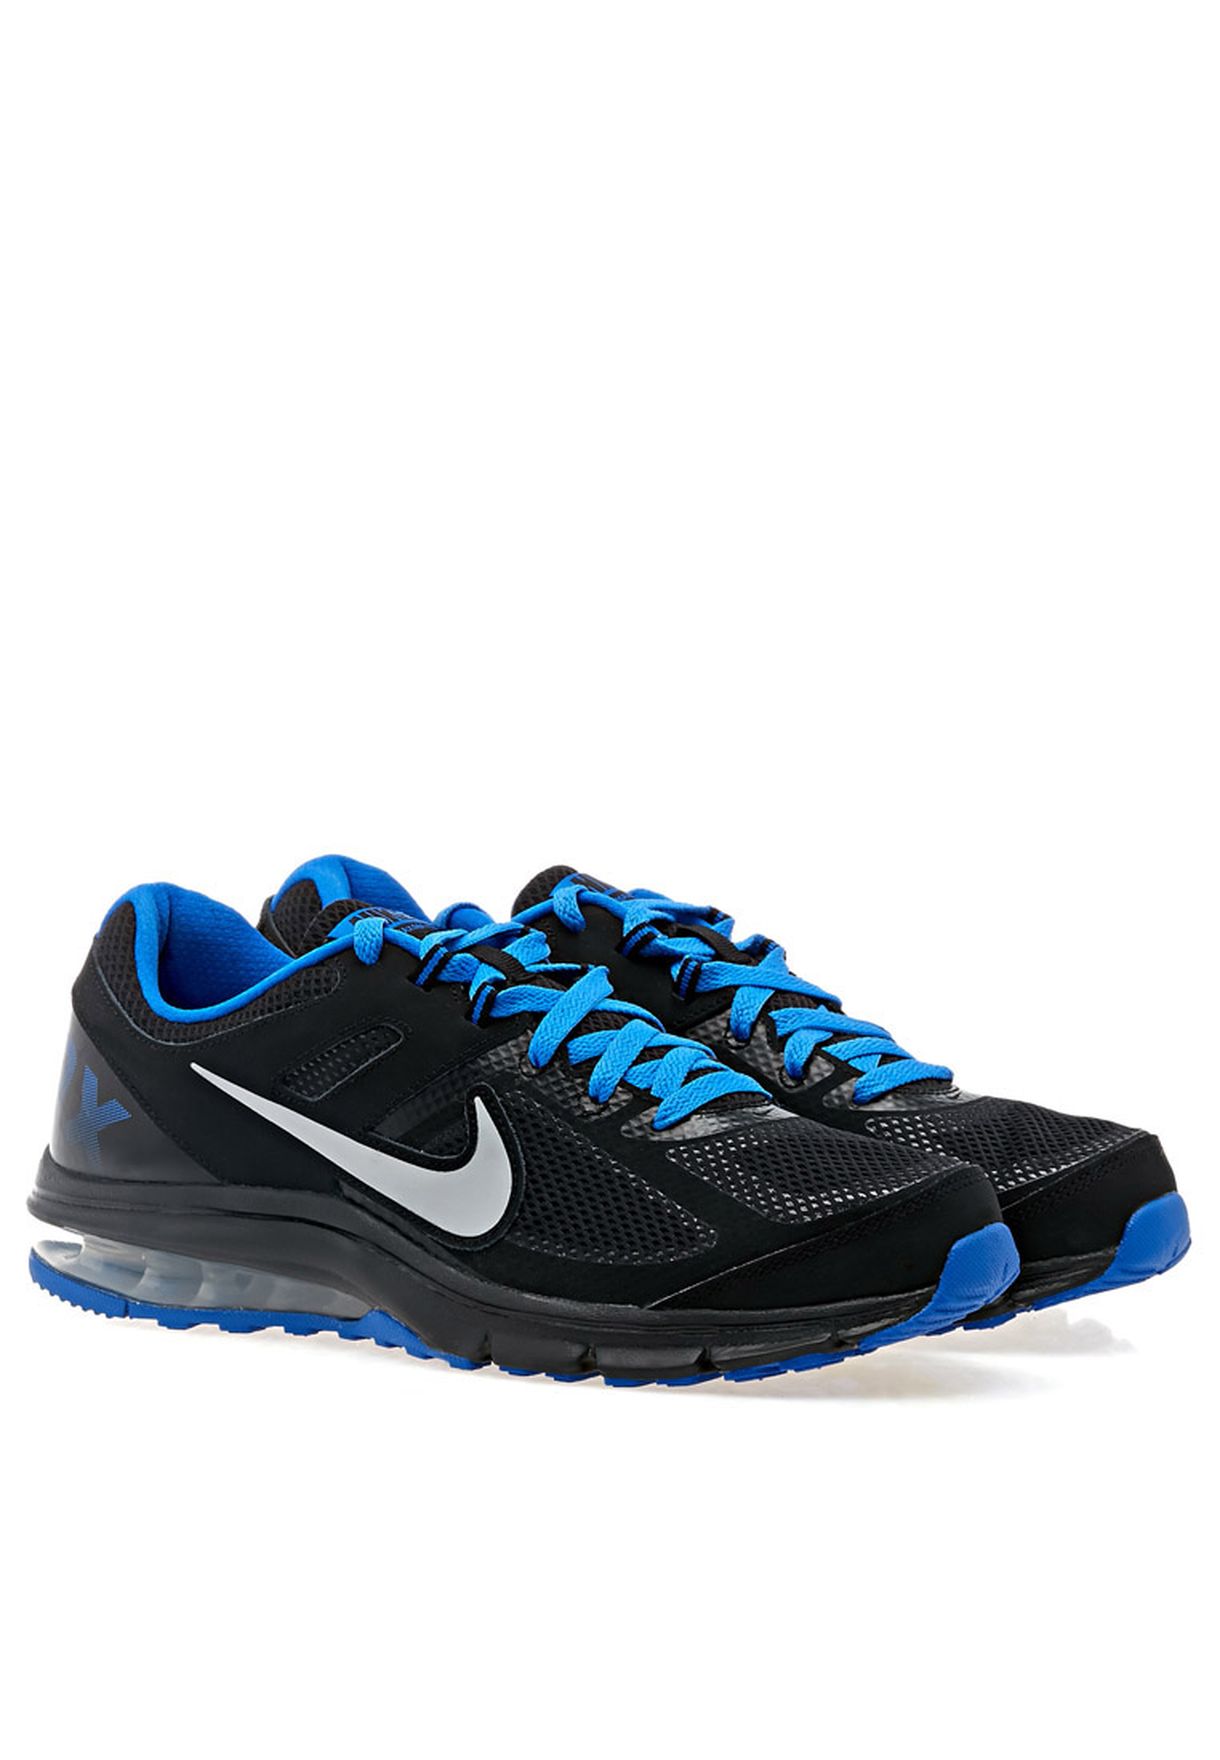 Air Max Defy Rn Sports Shoes for Men 